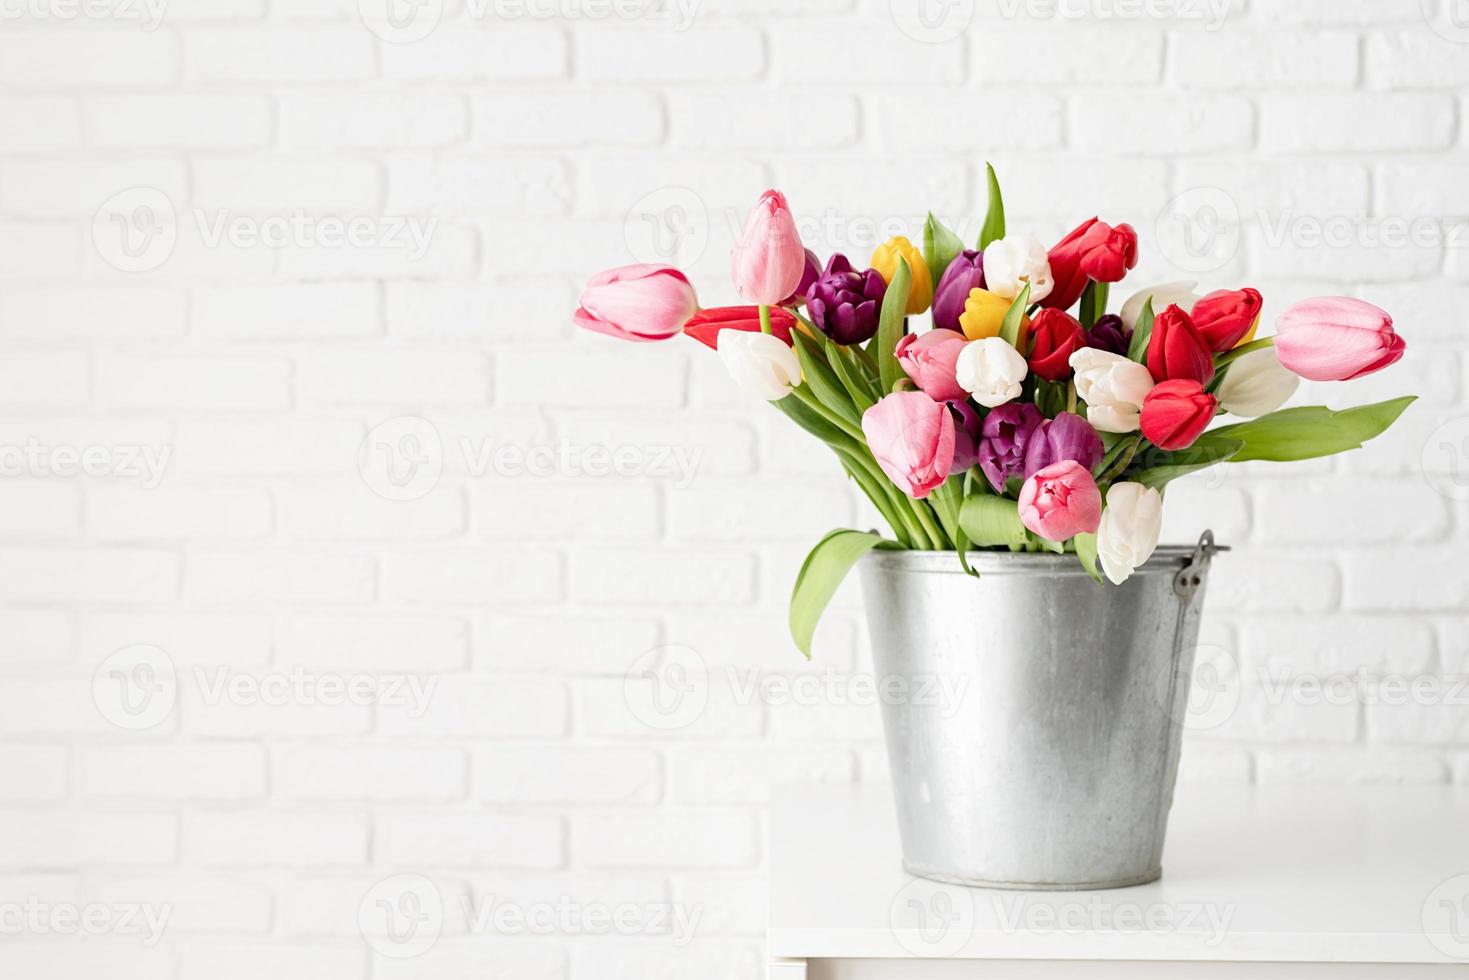 Bucket of tulip flowers over white brick wall background photo